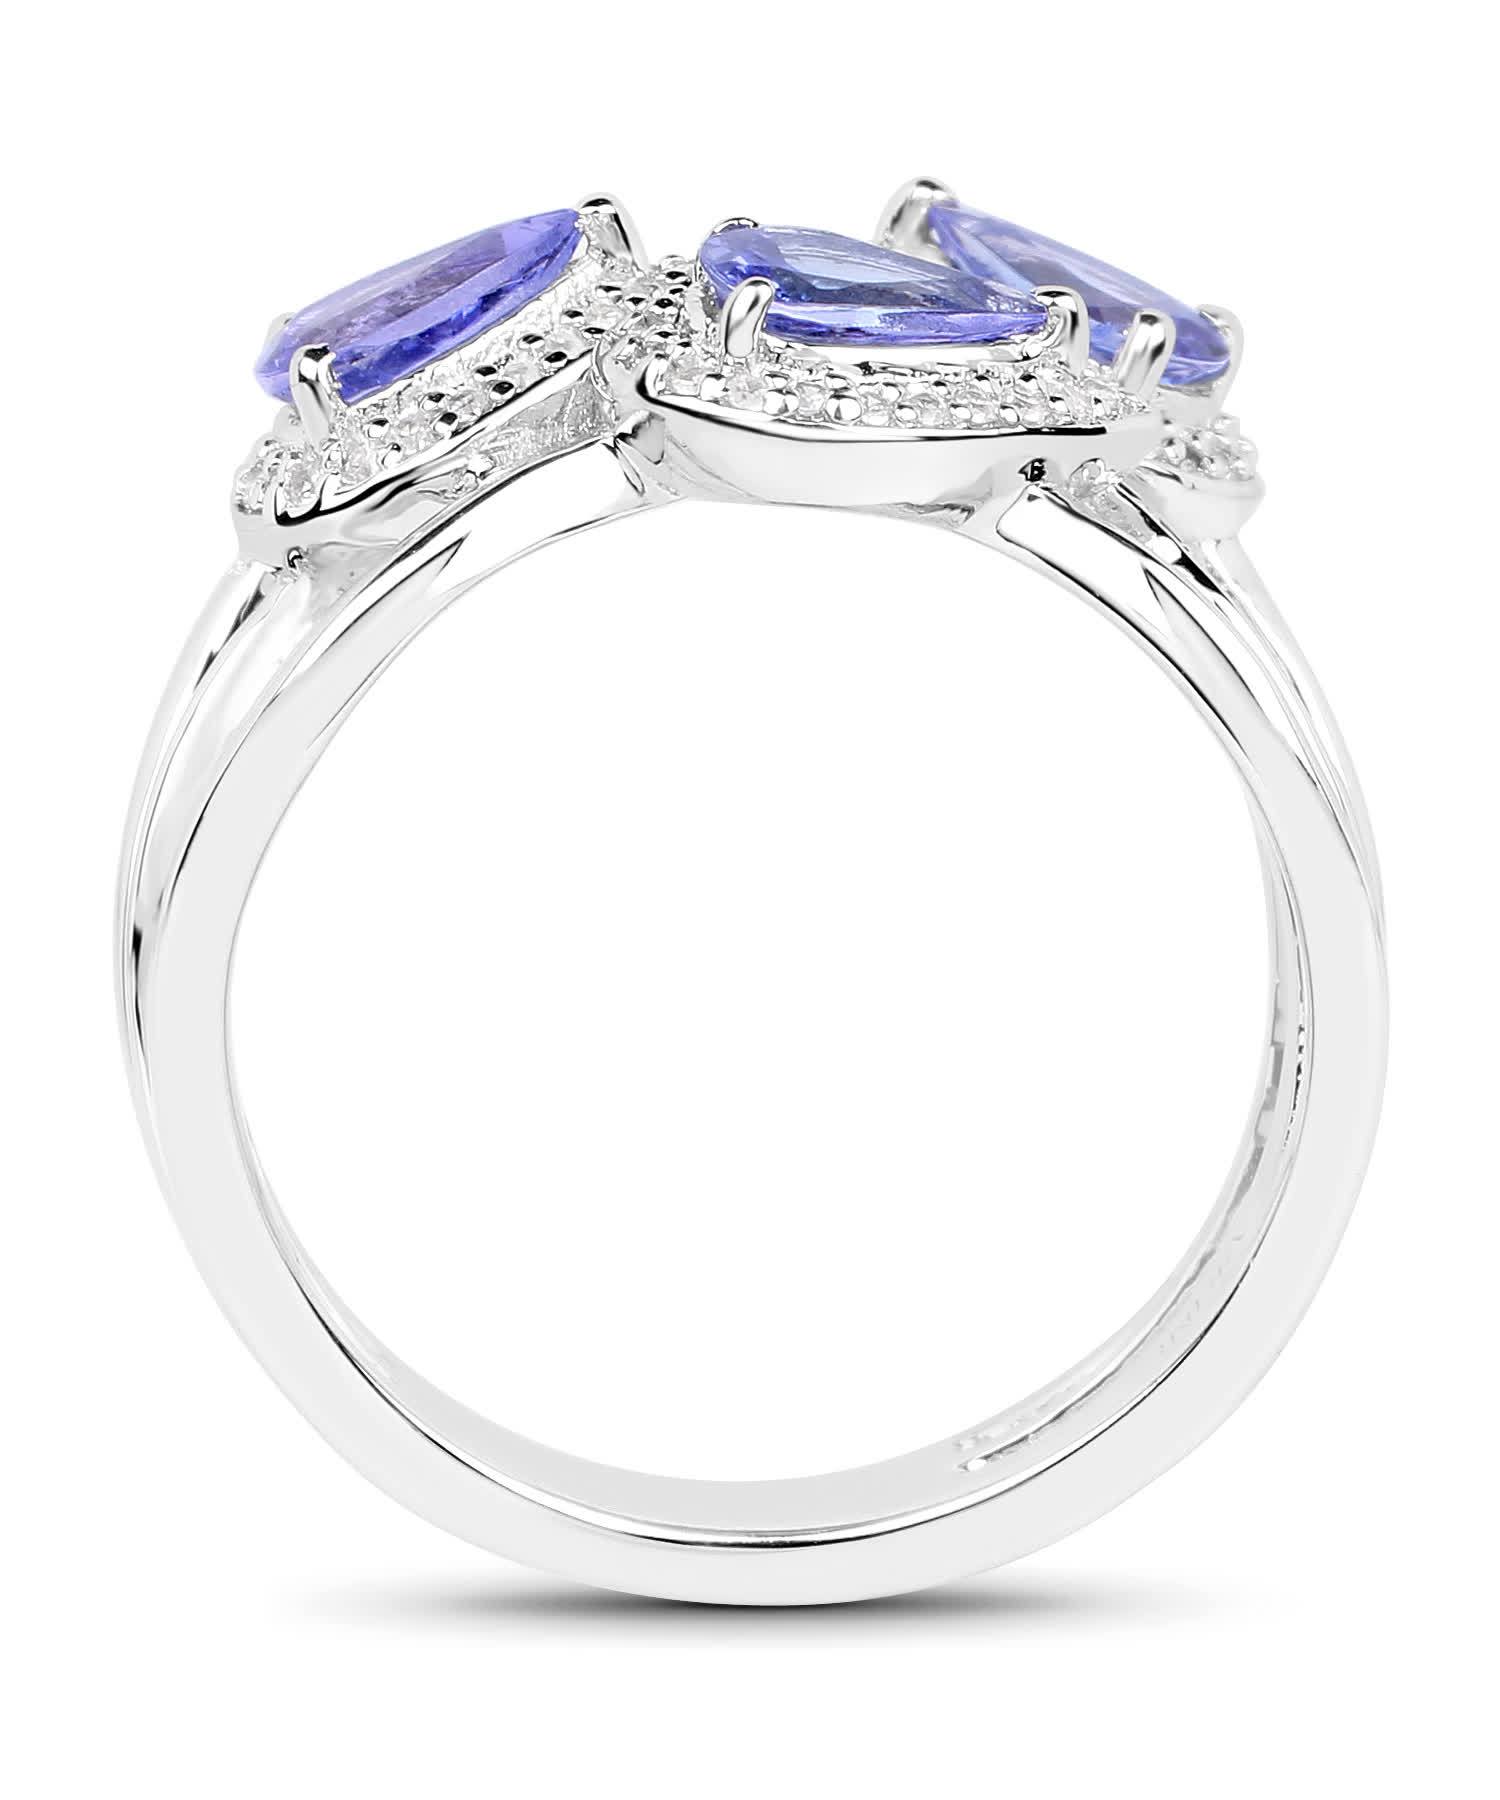 1.52ctw Natural Tanzanite and Zircon Rhodium Plated 925 Sterling Silver Cocktail Ring View 3